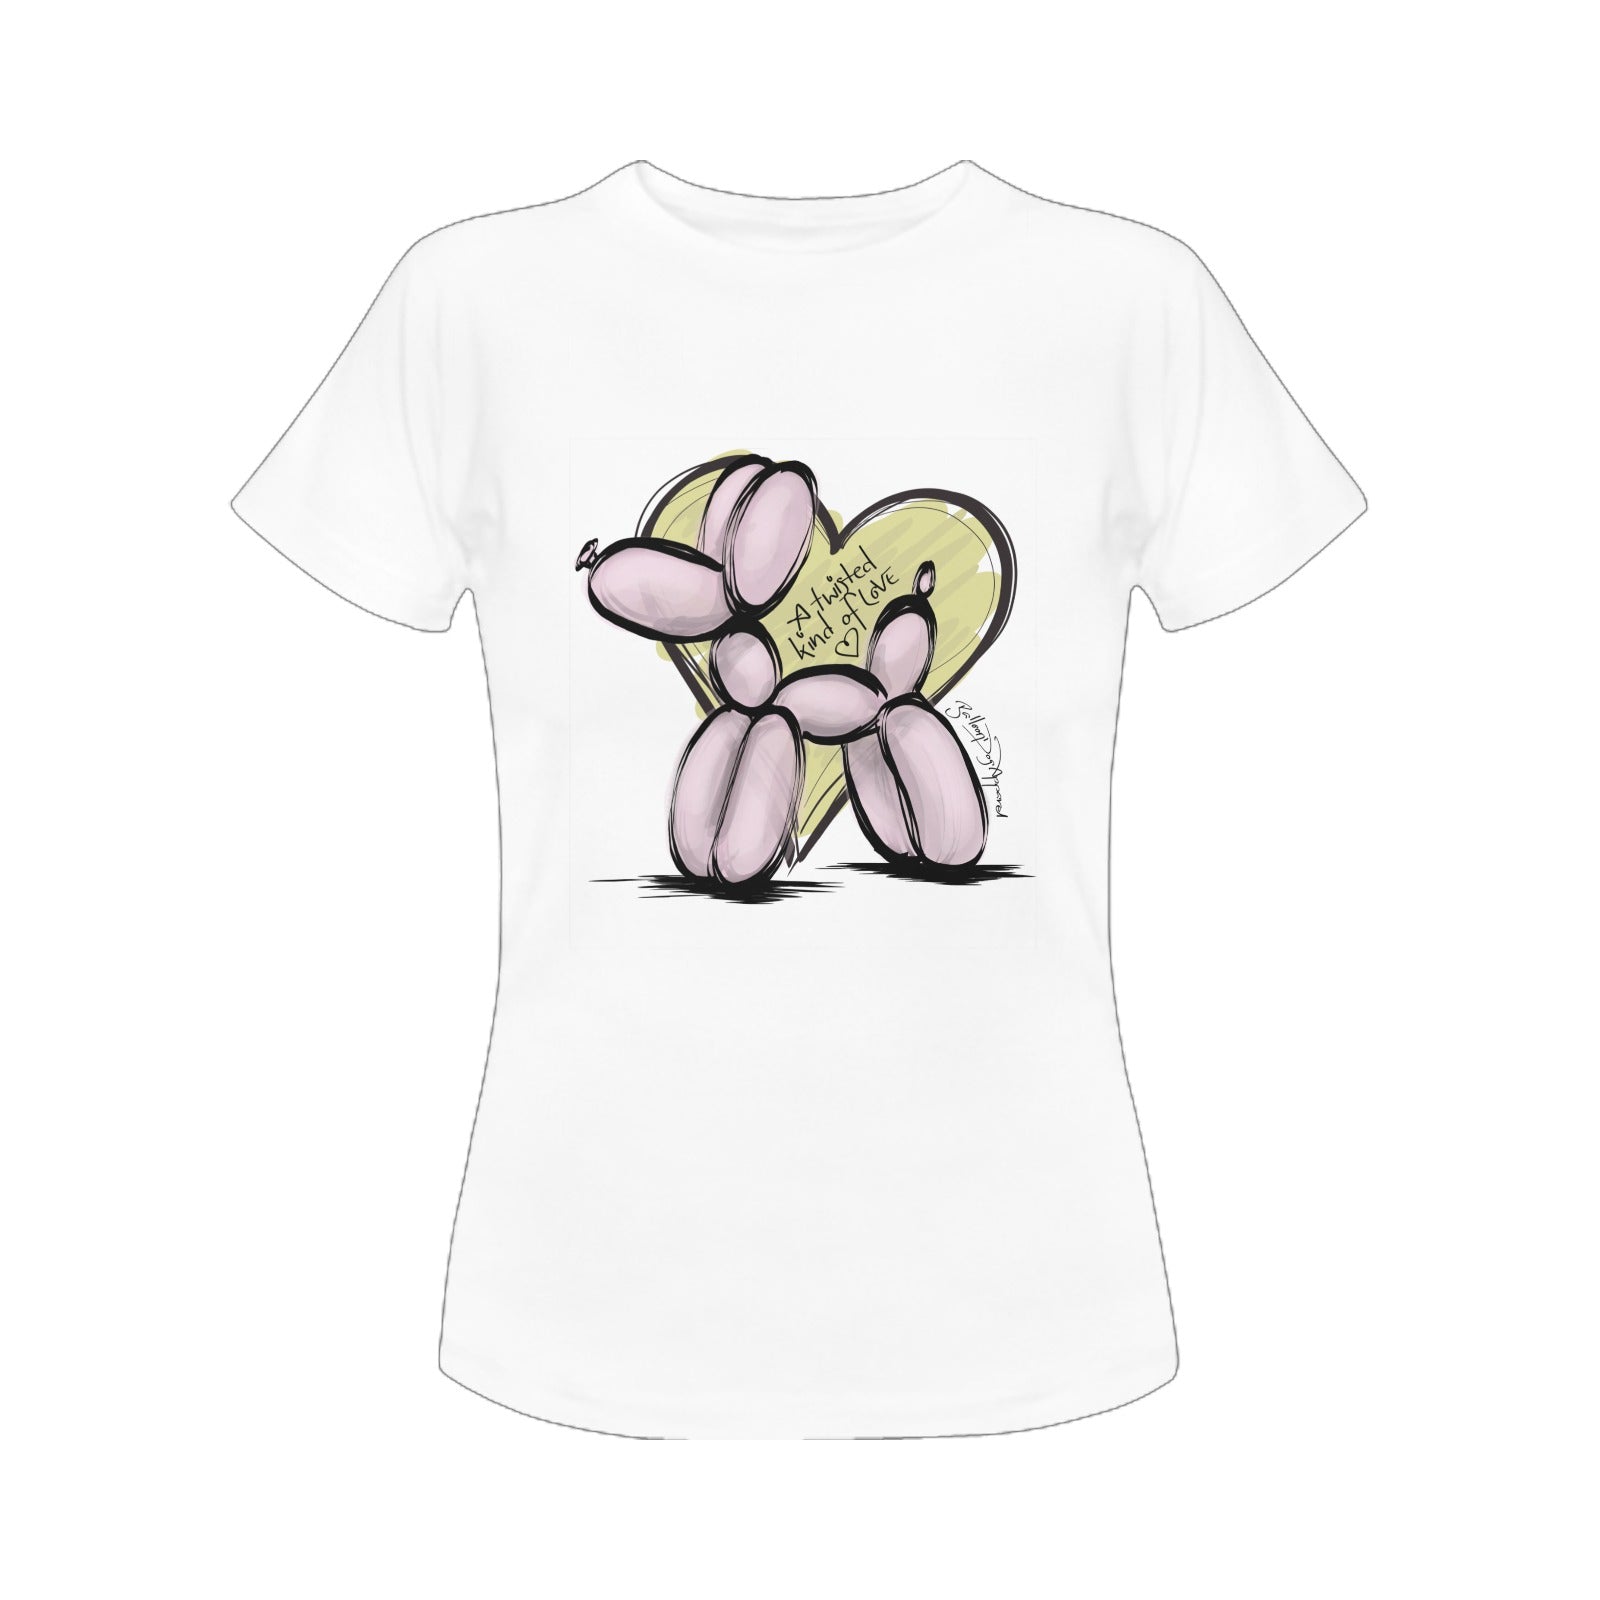 Balloon Dog T-shirt A Twisted Kind Of Love 